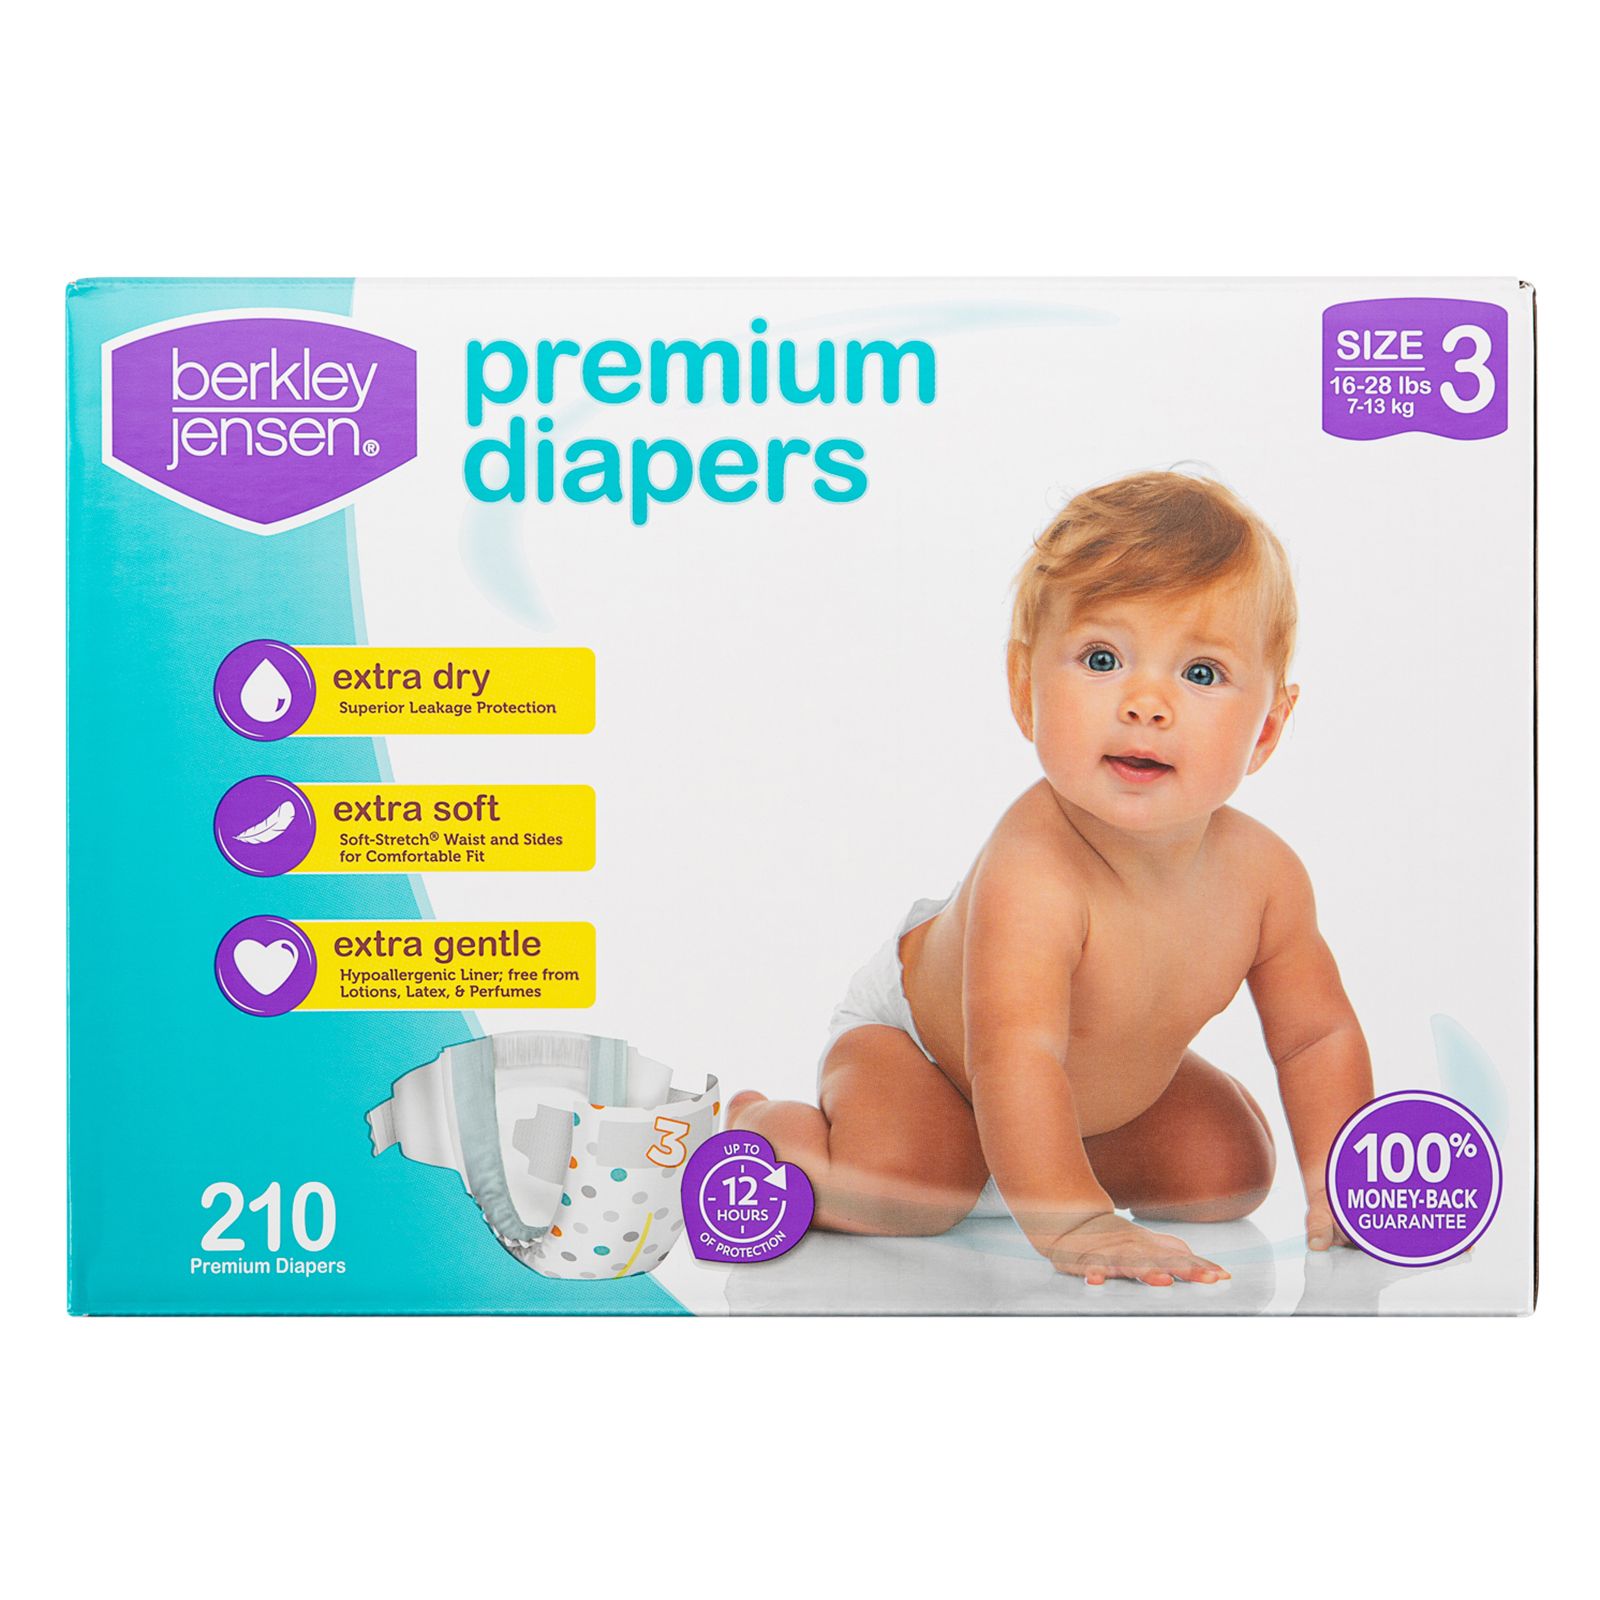 bjs diapers size 5